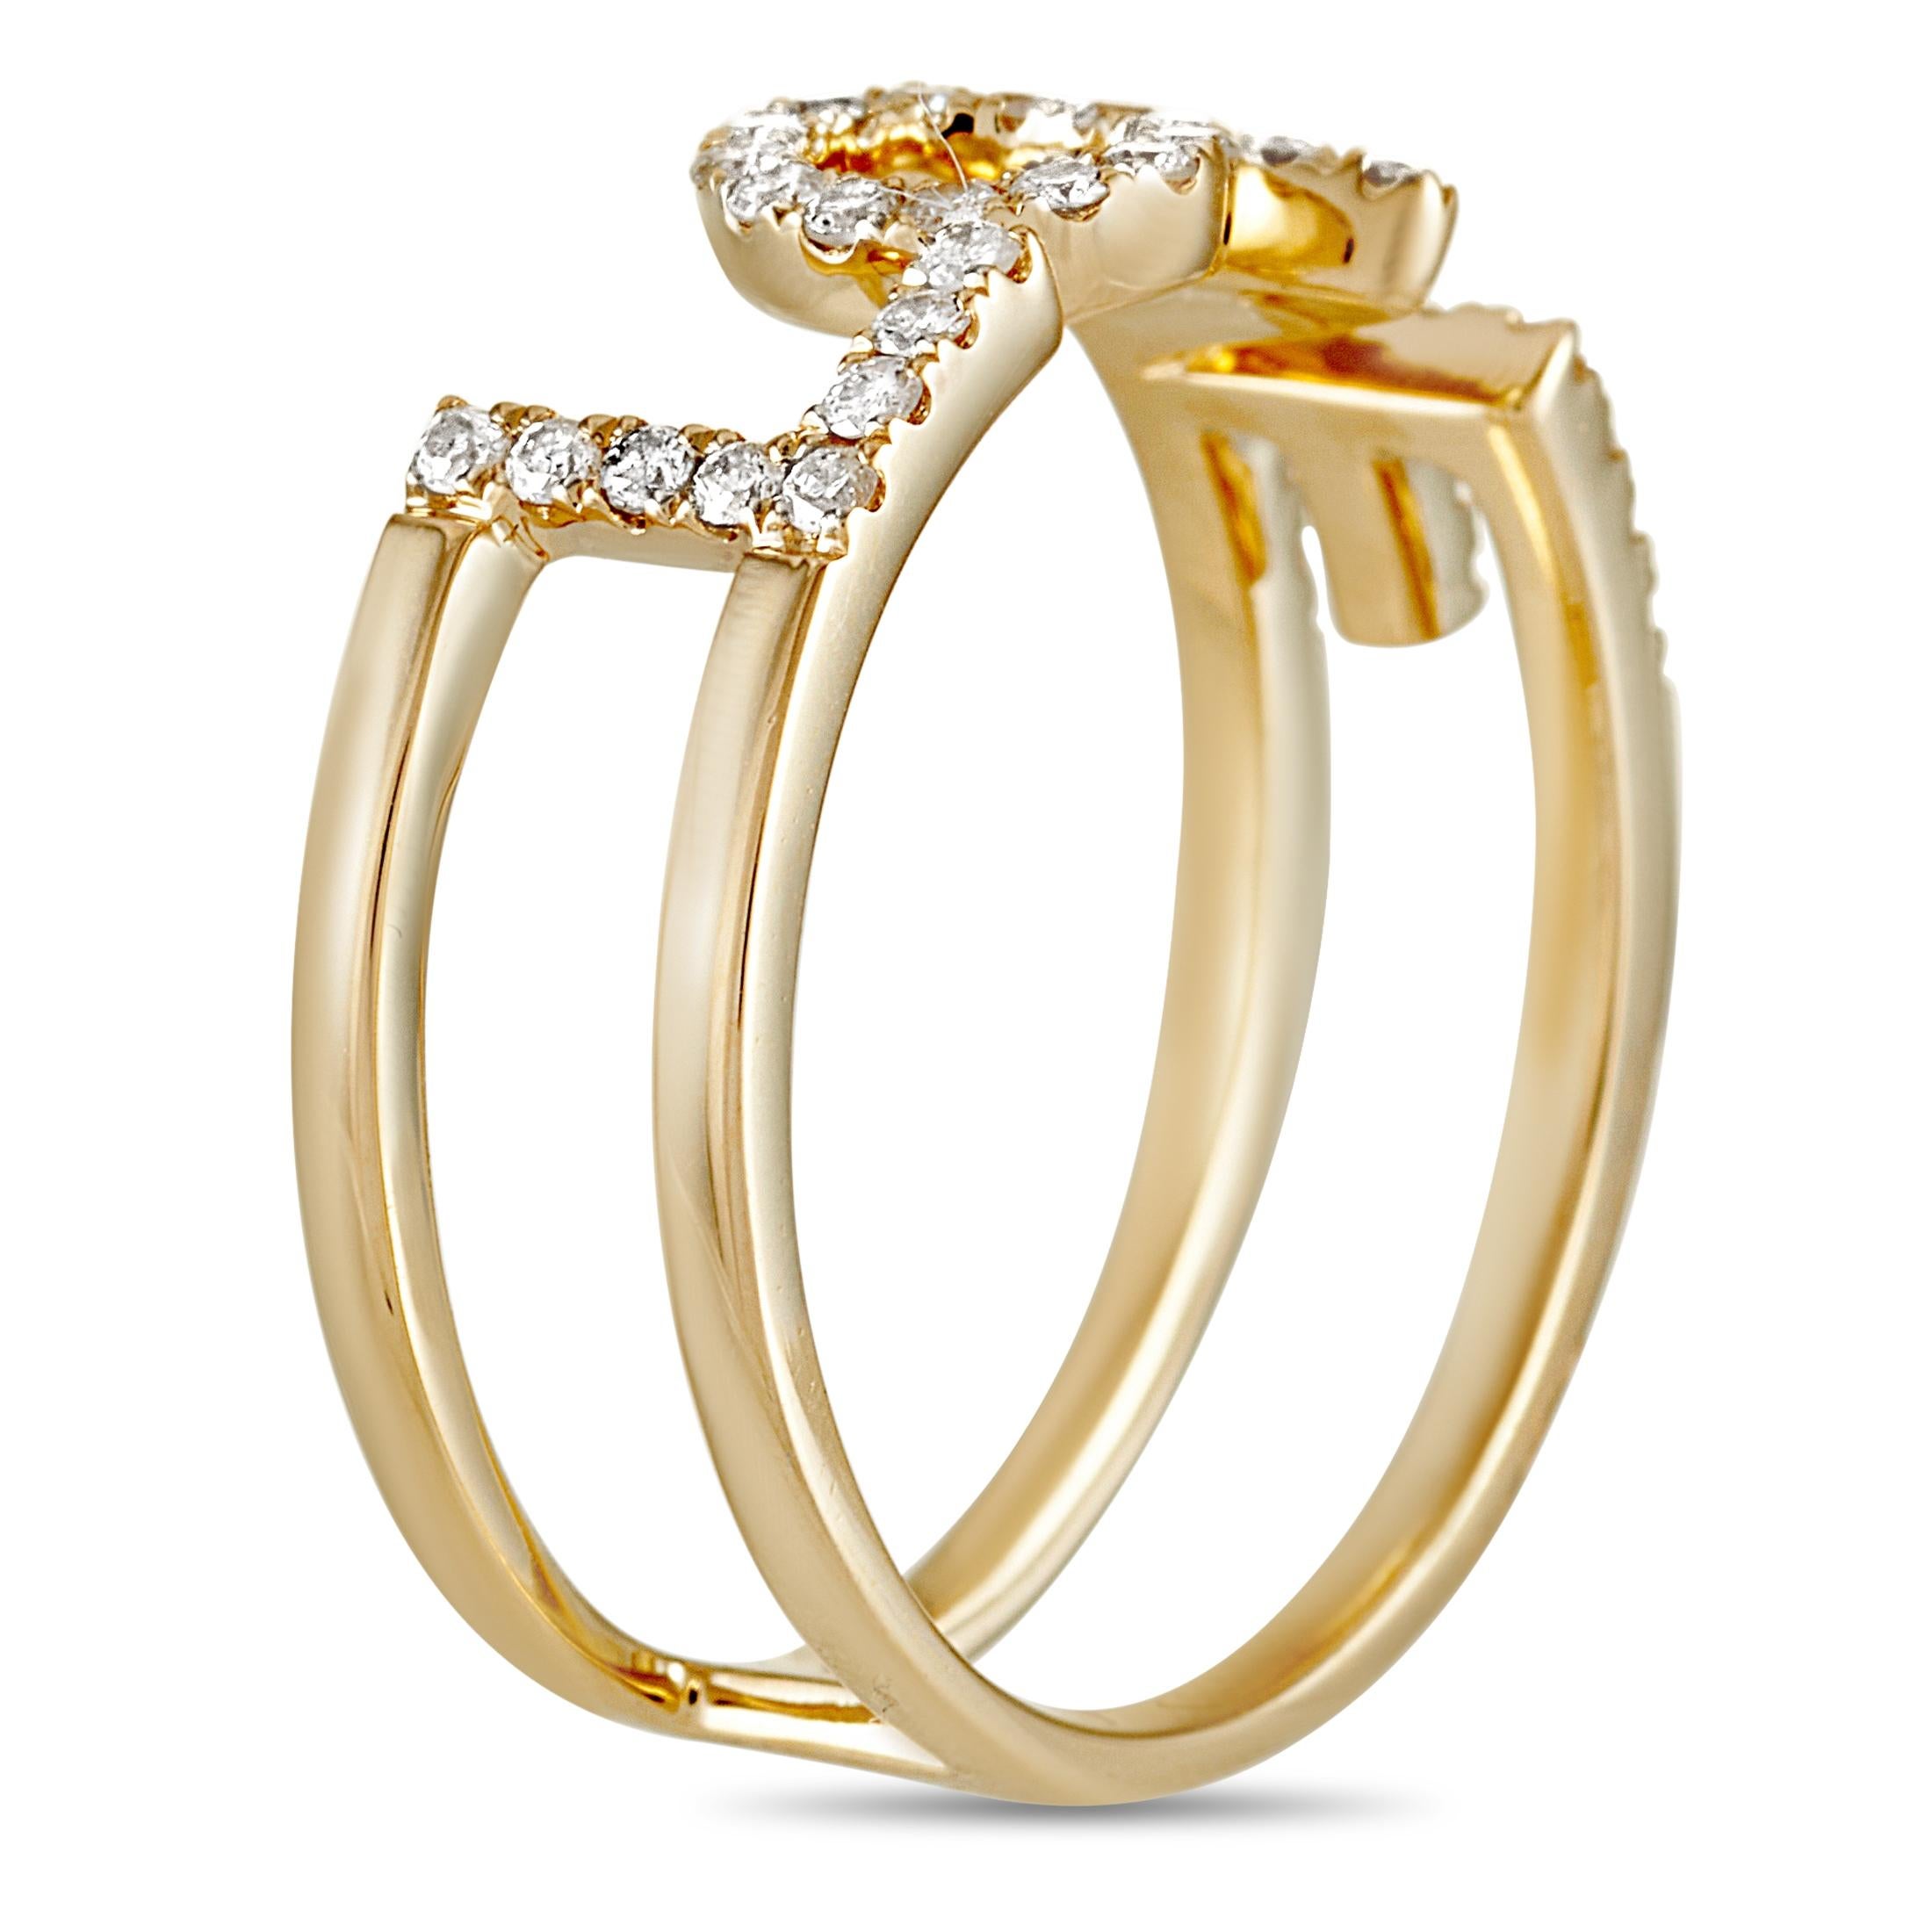 This LB Exclusive love ring is made of 14K yellow gold and embellished with diamonds that amount to 0.35 carats. The ring weighs 2.6 grams and boasts band thickness of 6 mm, while top dimensions measure 6 by 16 mm.
 
 Offered in brand new